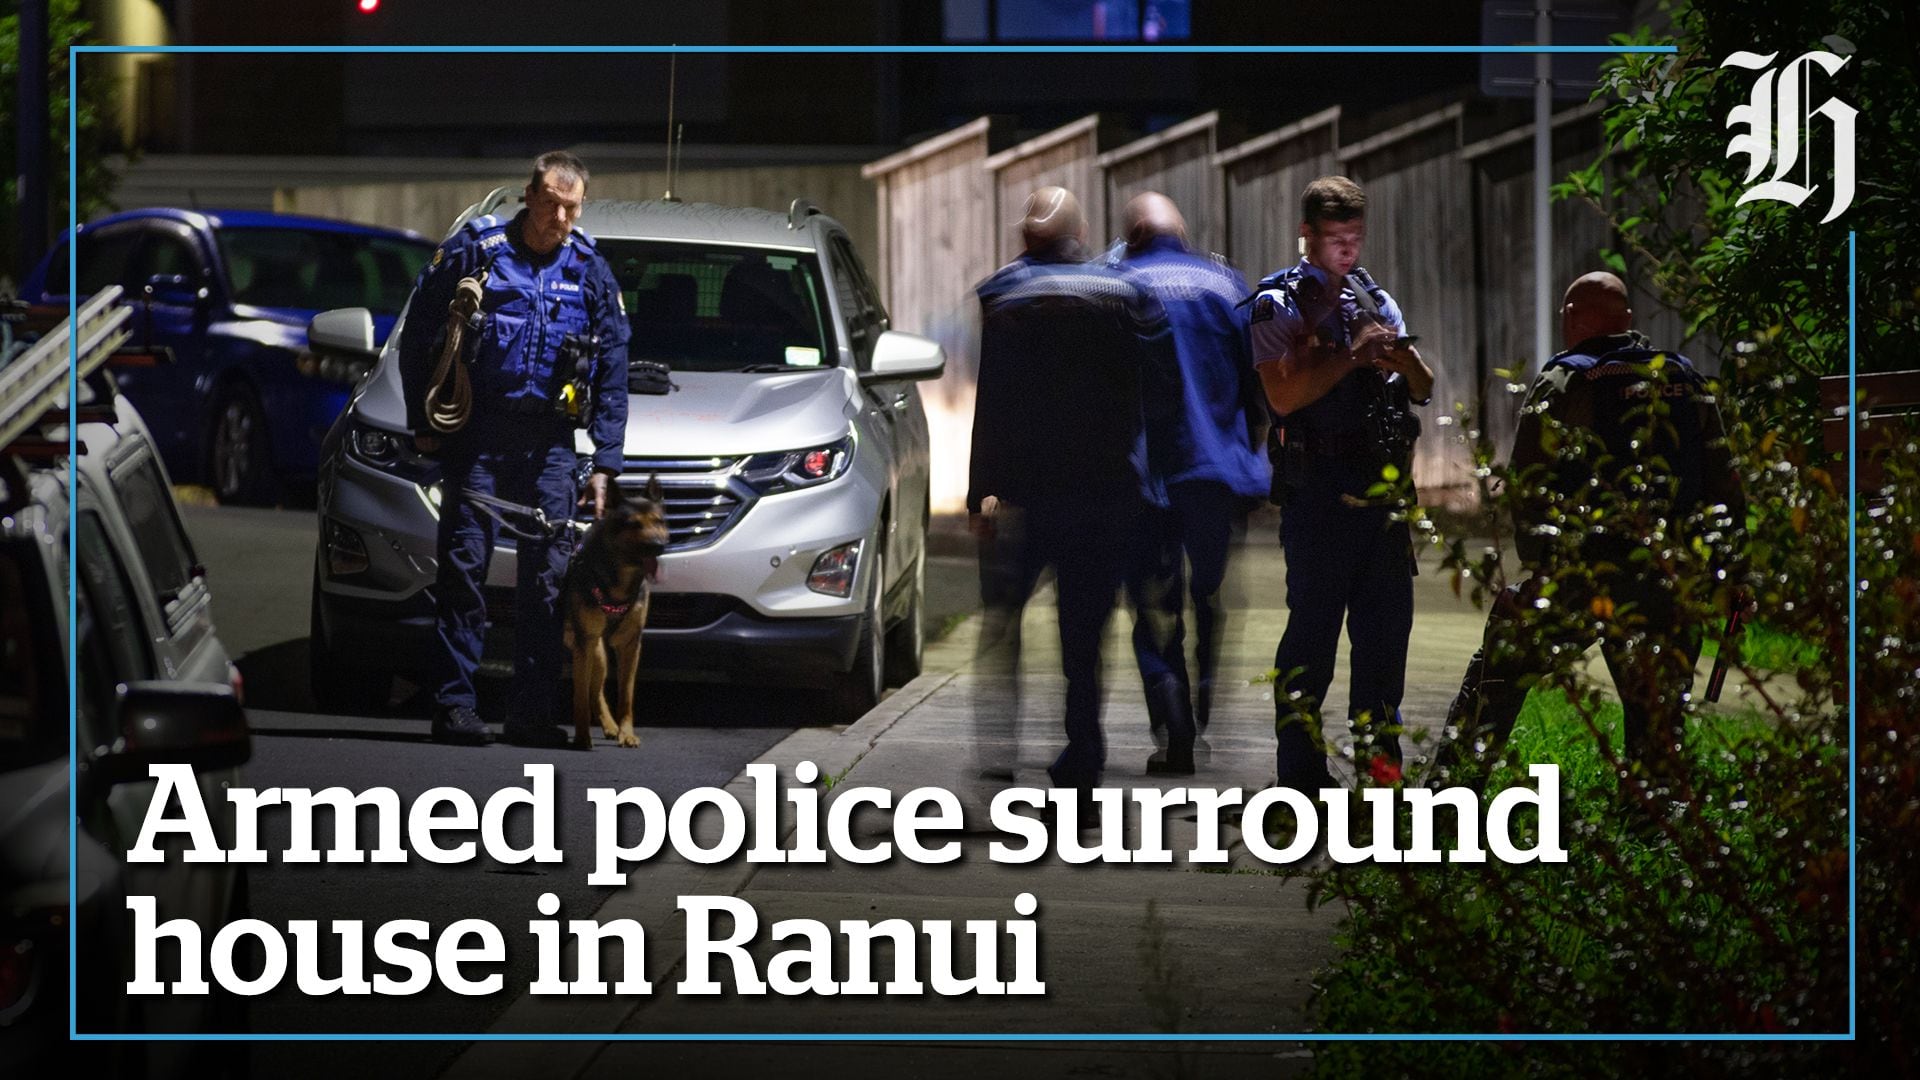 Armed police surround house in Ranui after late night incident - NZ Herald